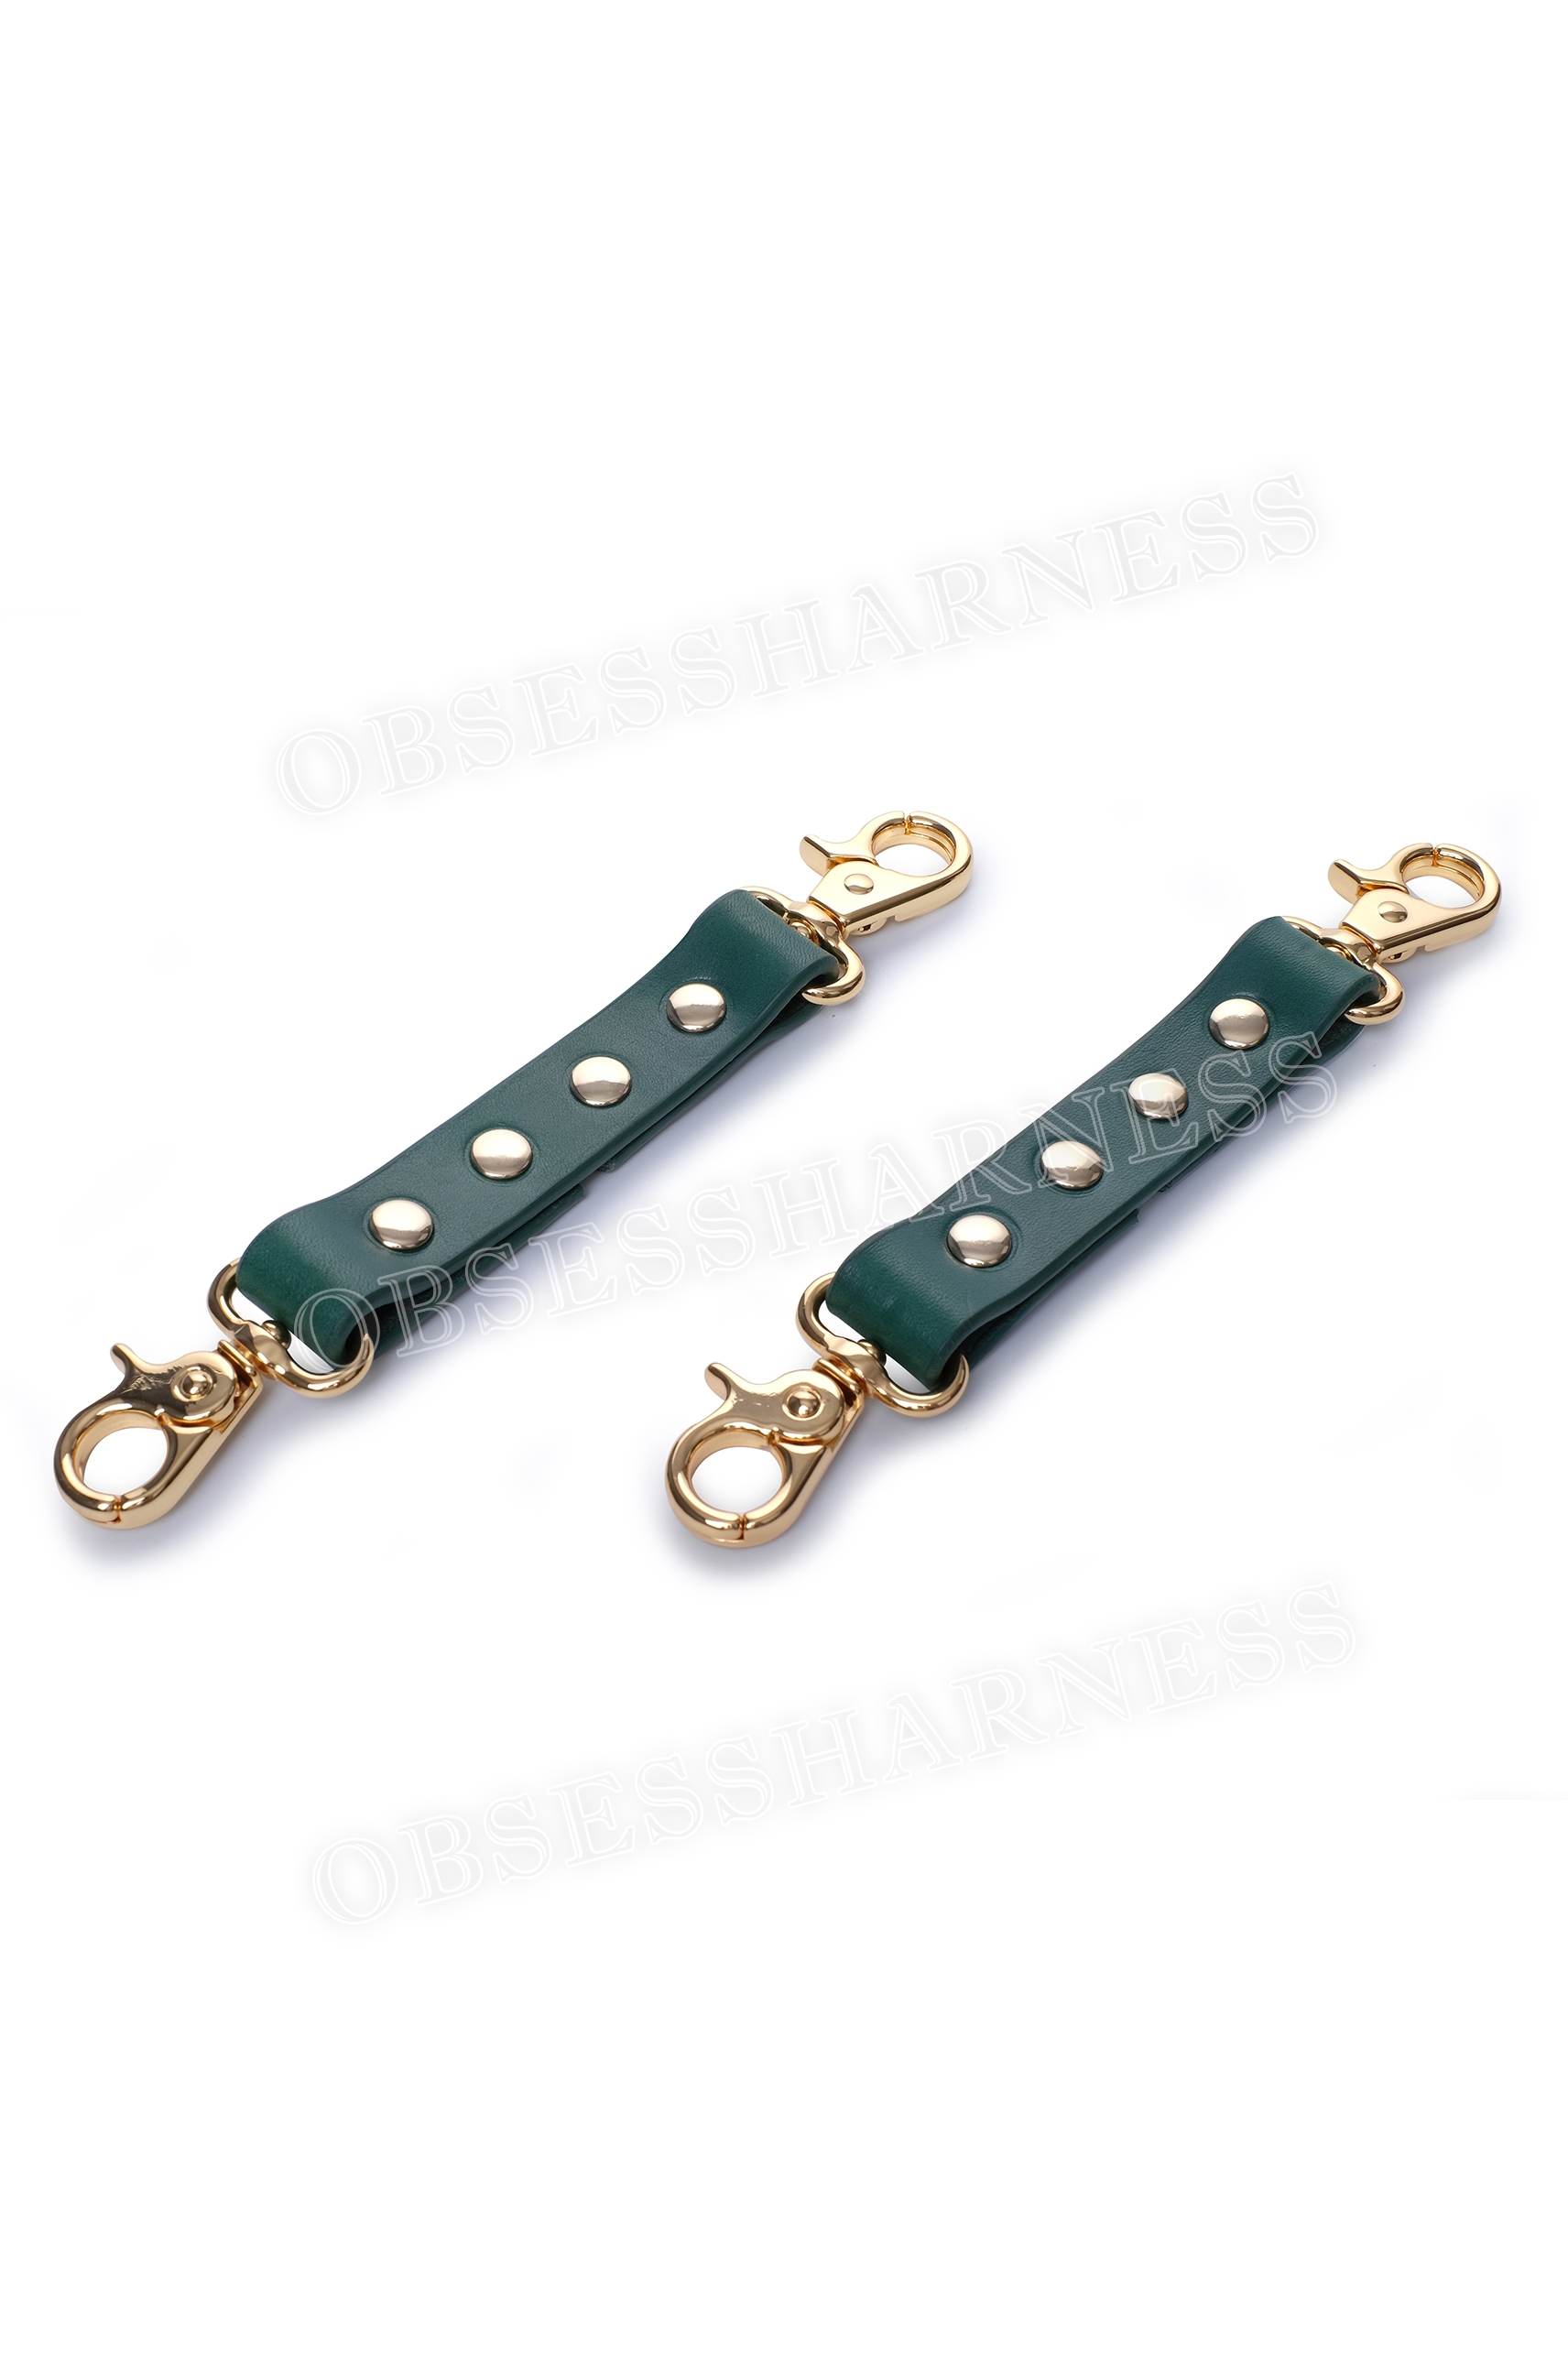 Leather double fixation green for fastening arm and leg restraints in role-playing sadomasochistic games - Obsessharness